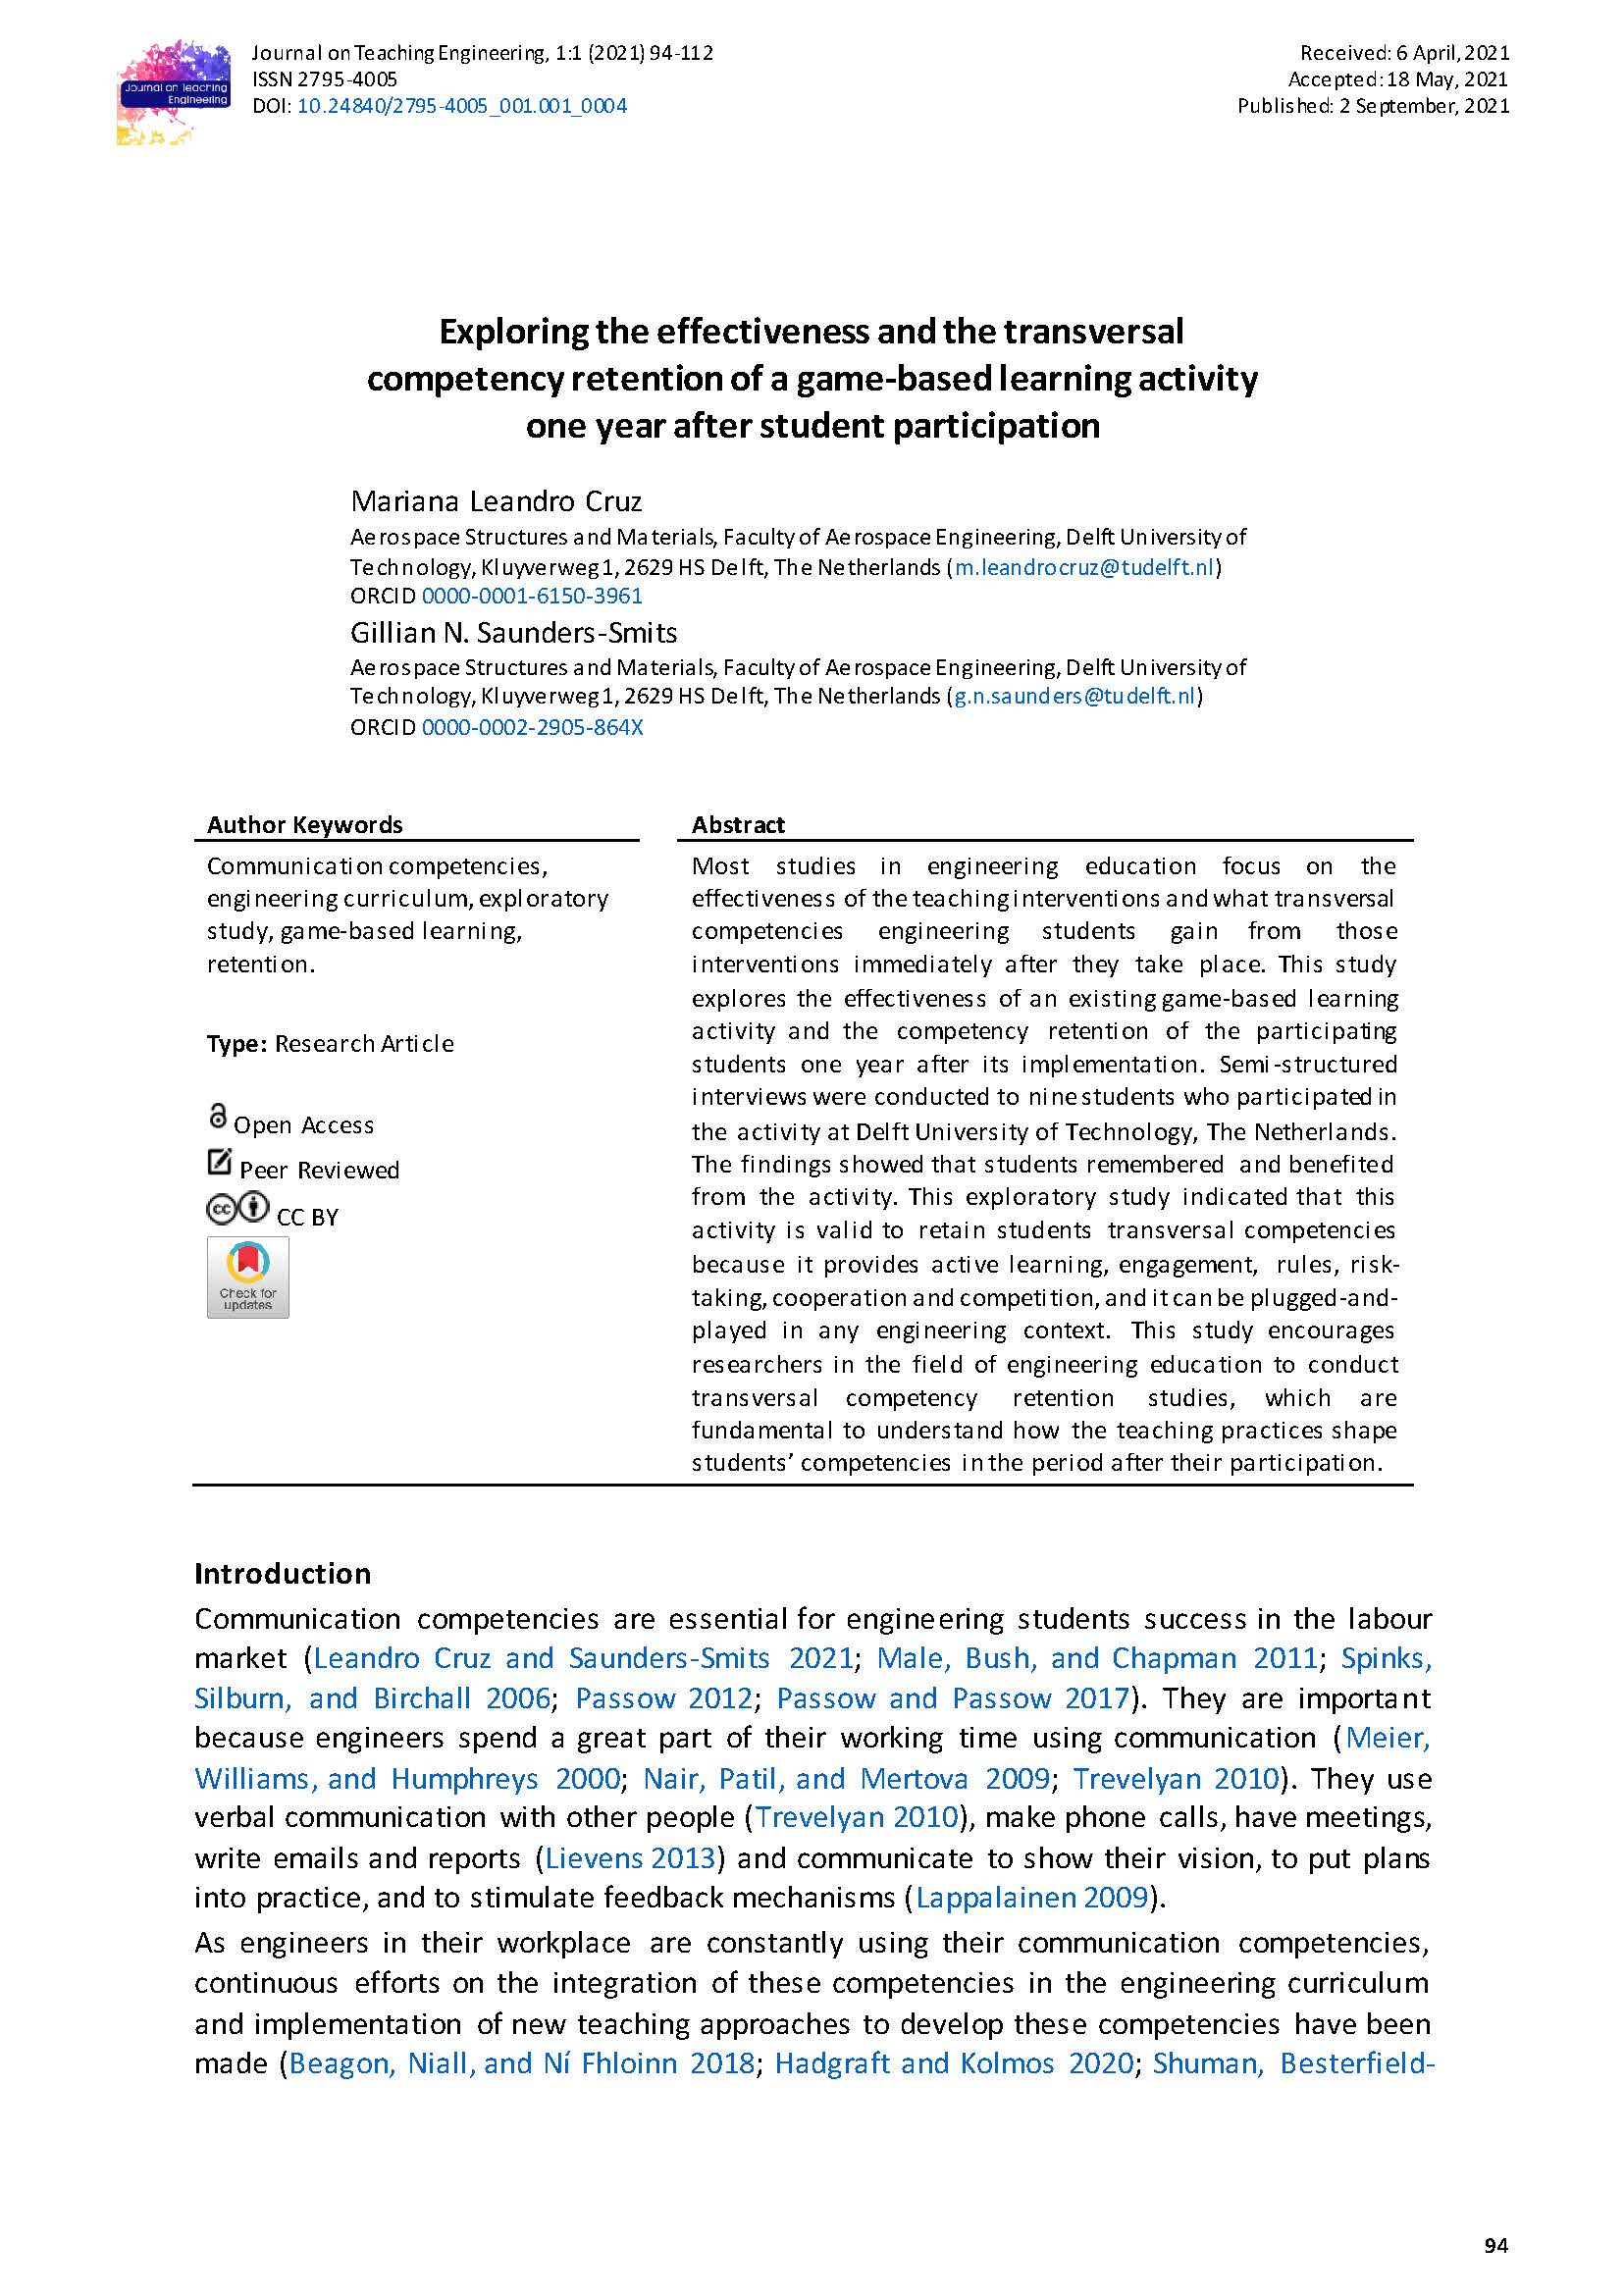 Exploring the effectiveness and the transversal competency retention of a game-based learning activity one year after student participation